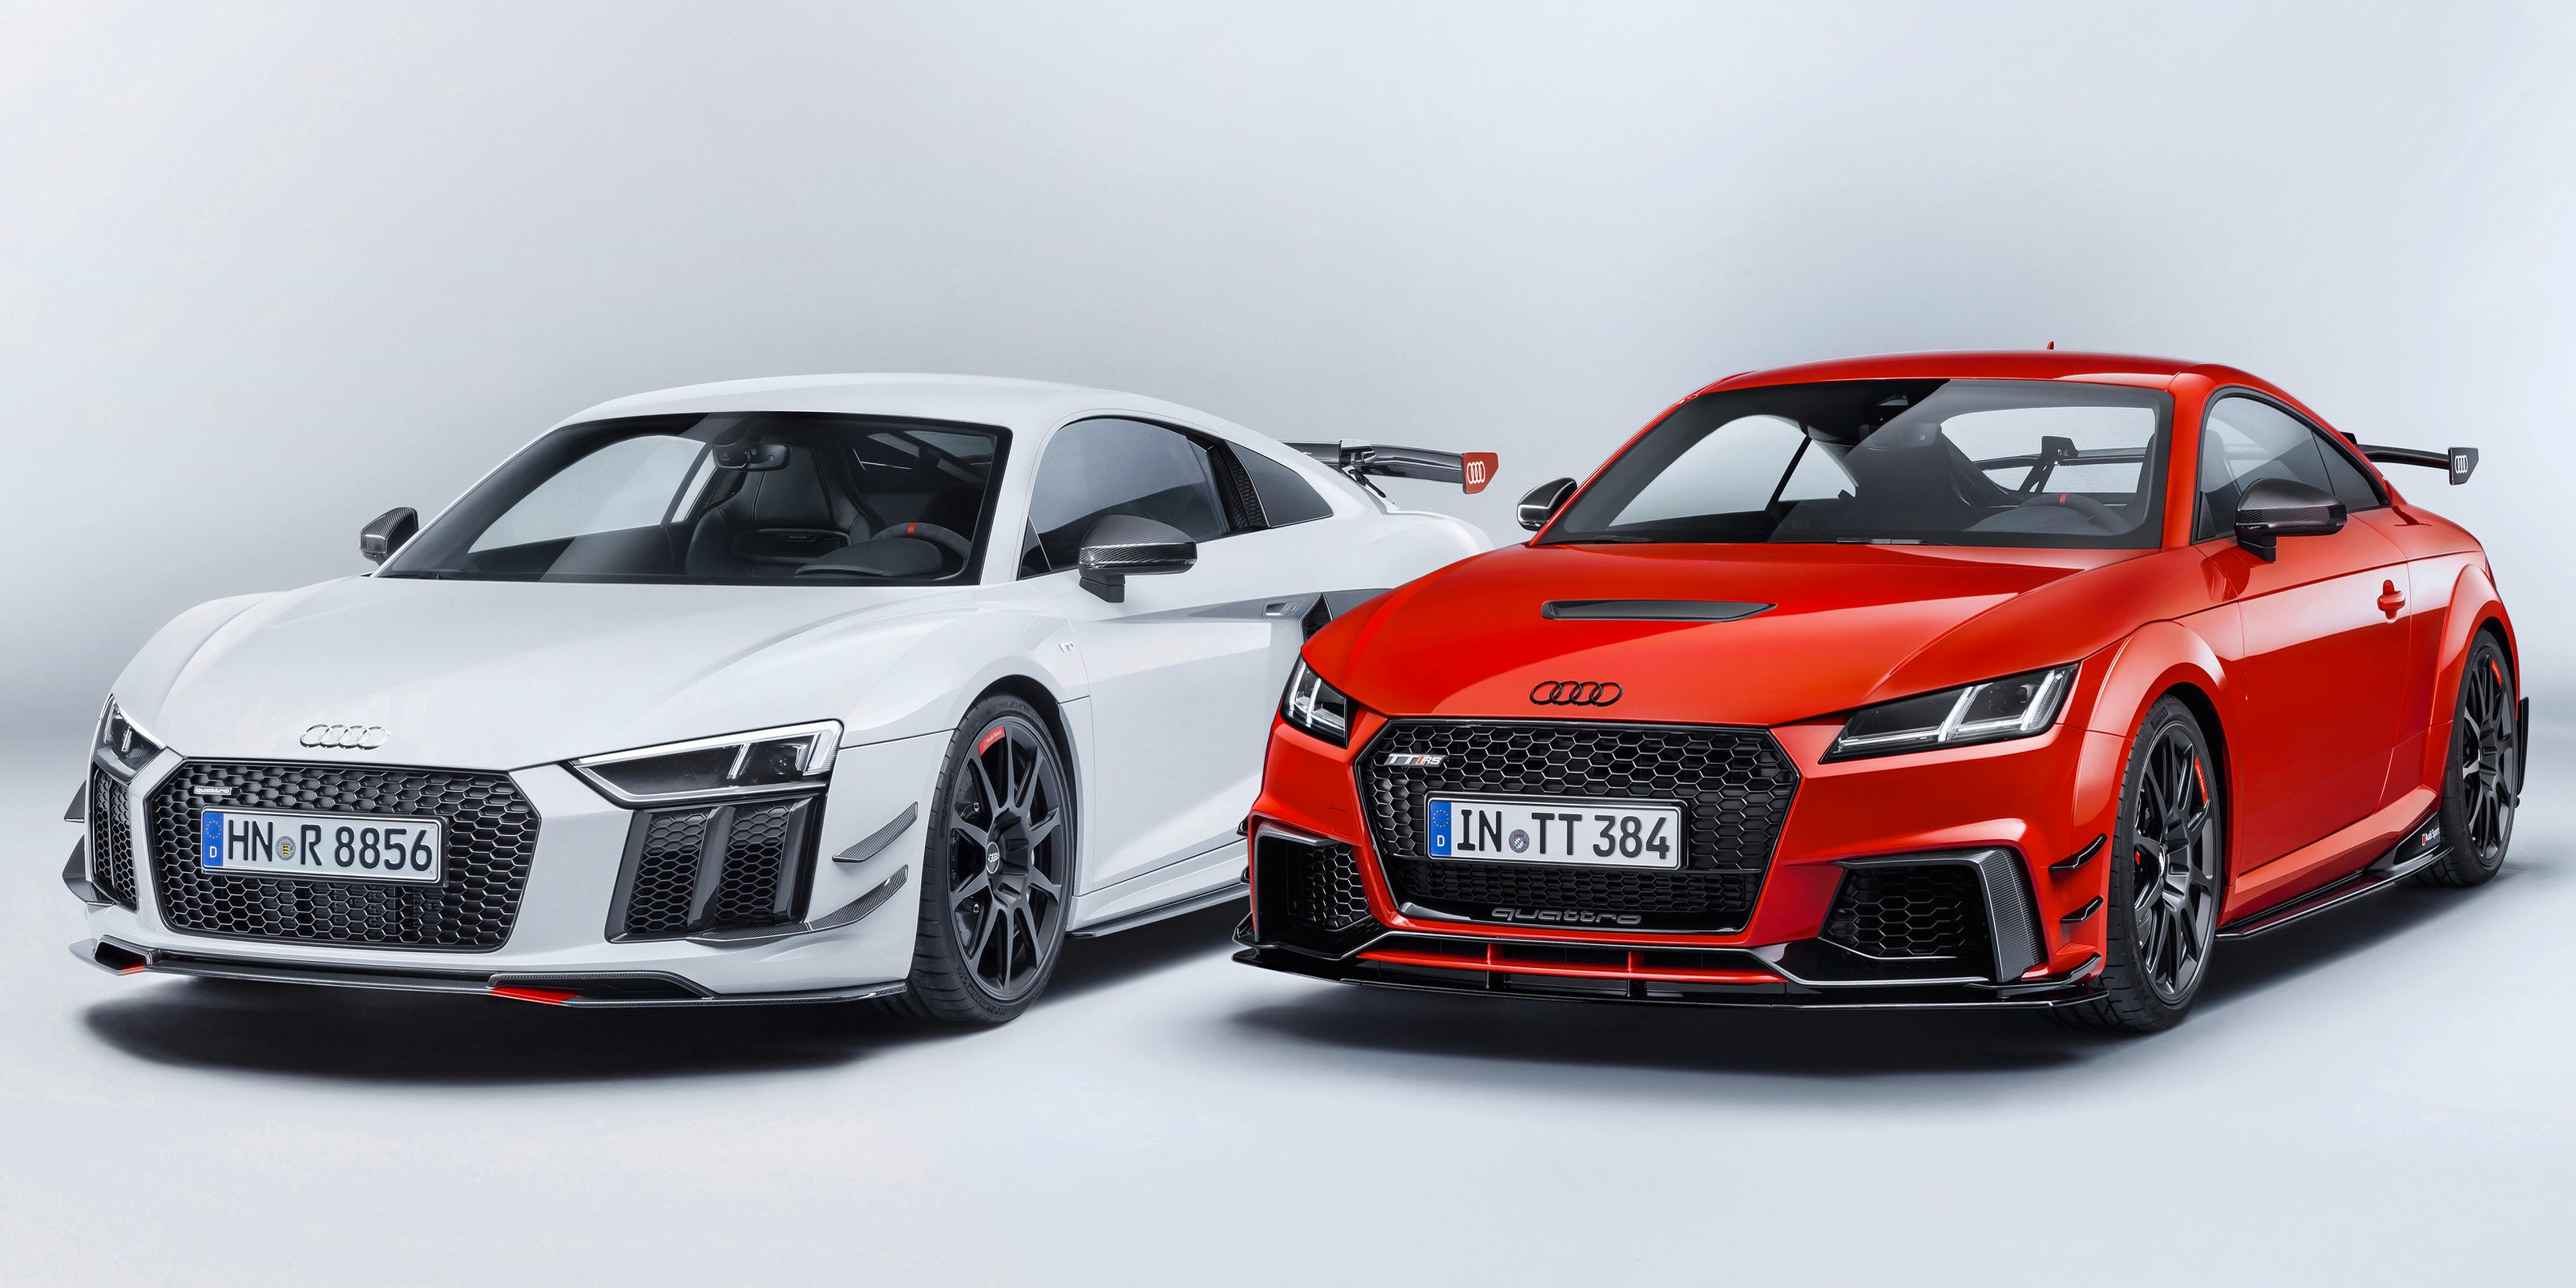 You Now Get an Audi Sport Aero Kit for the R8 and TT - QuattroWorld